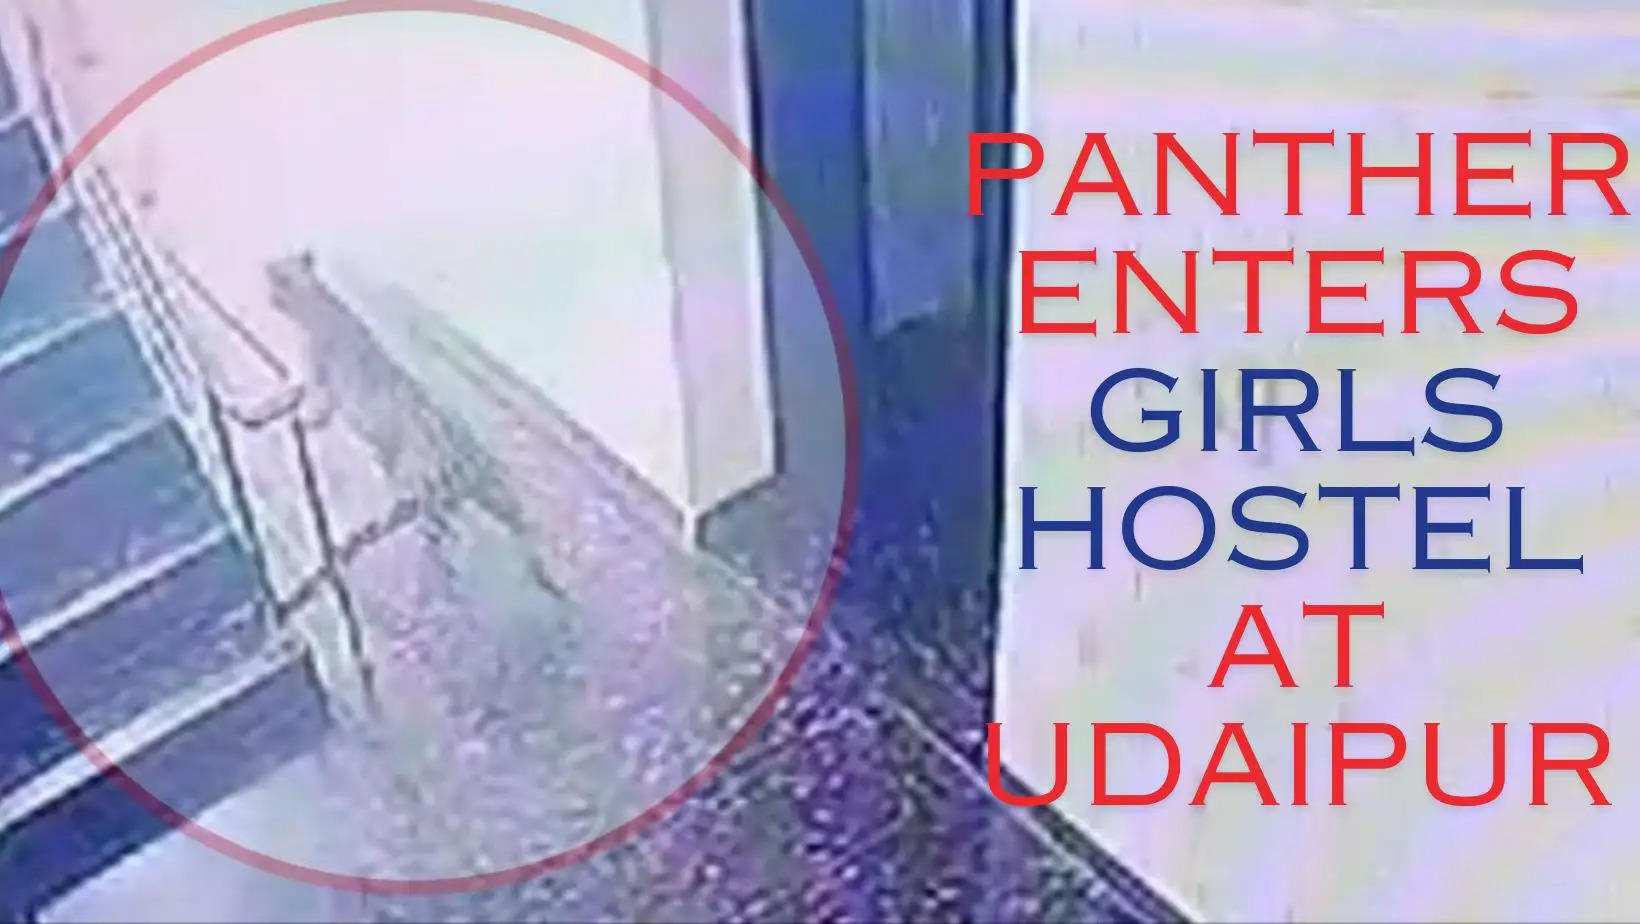 Panther sighted at Udaipur Parmatma GIrls Hostel